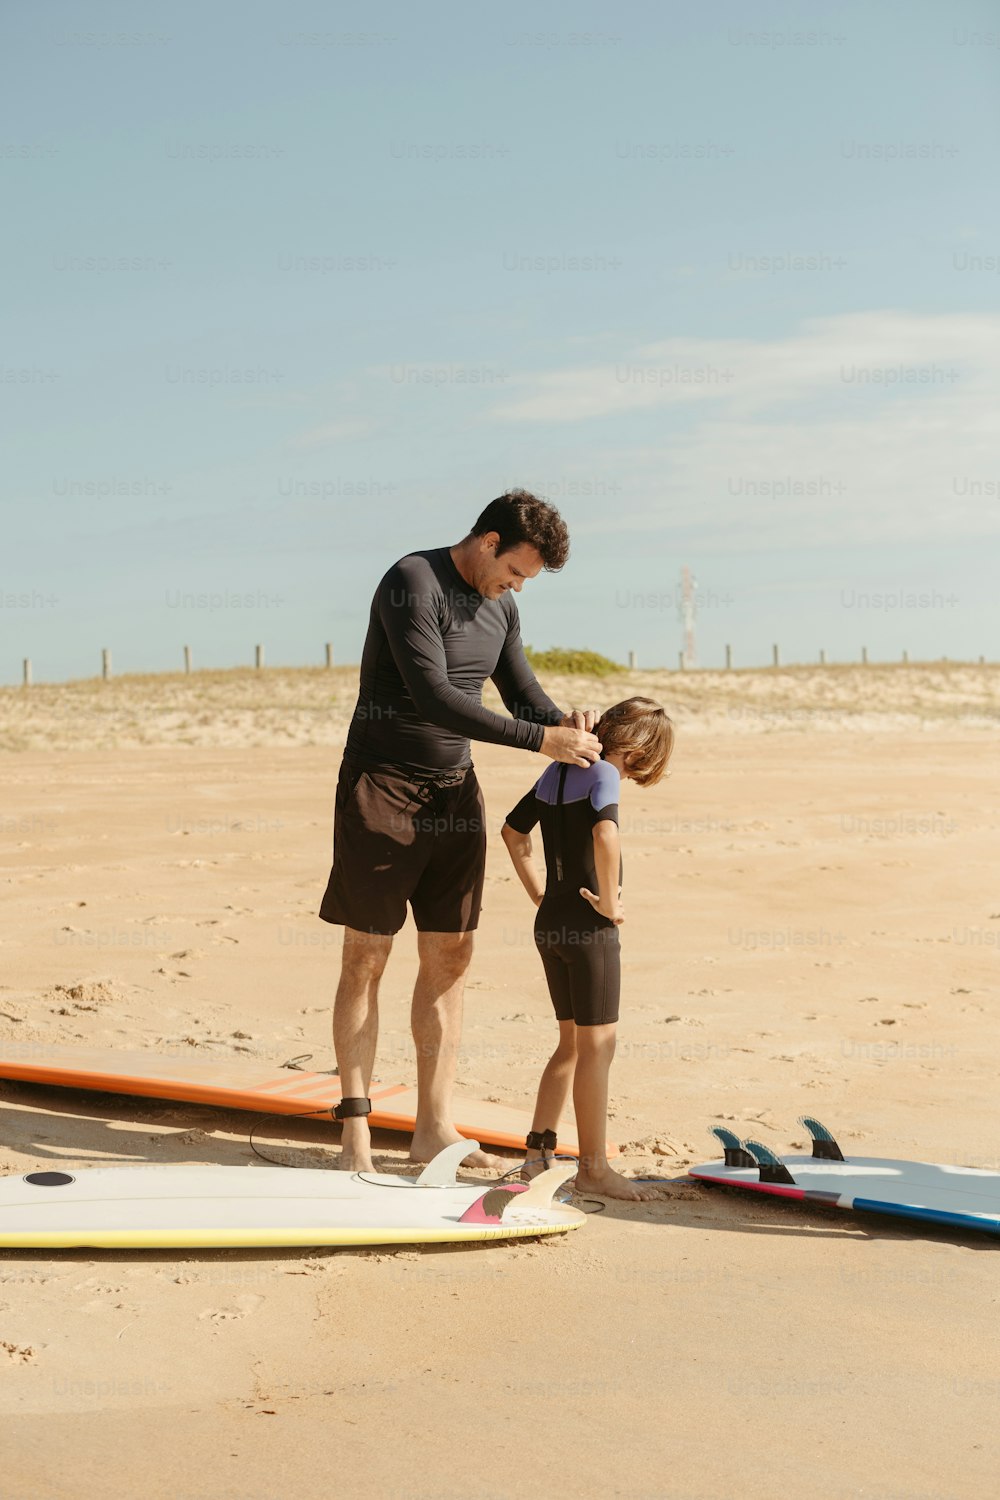 a man and a little girl standing on a beach next to surfboards